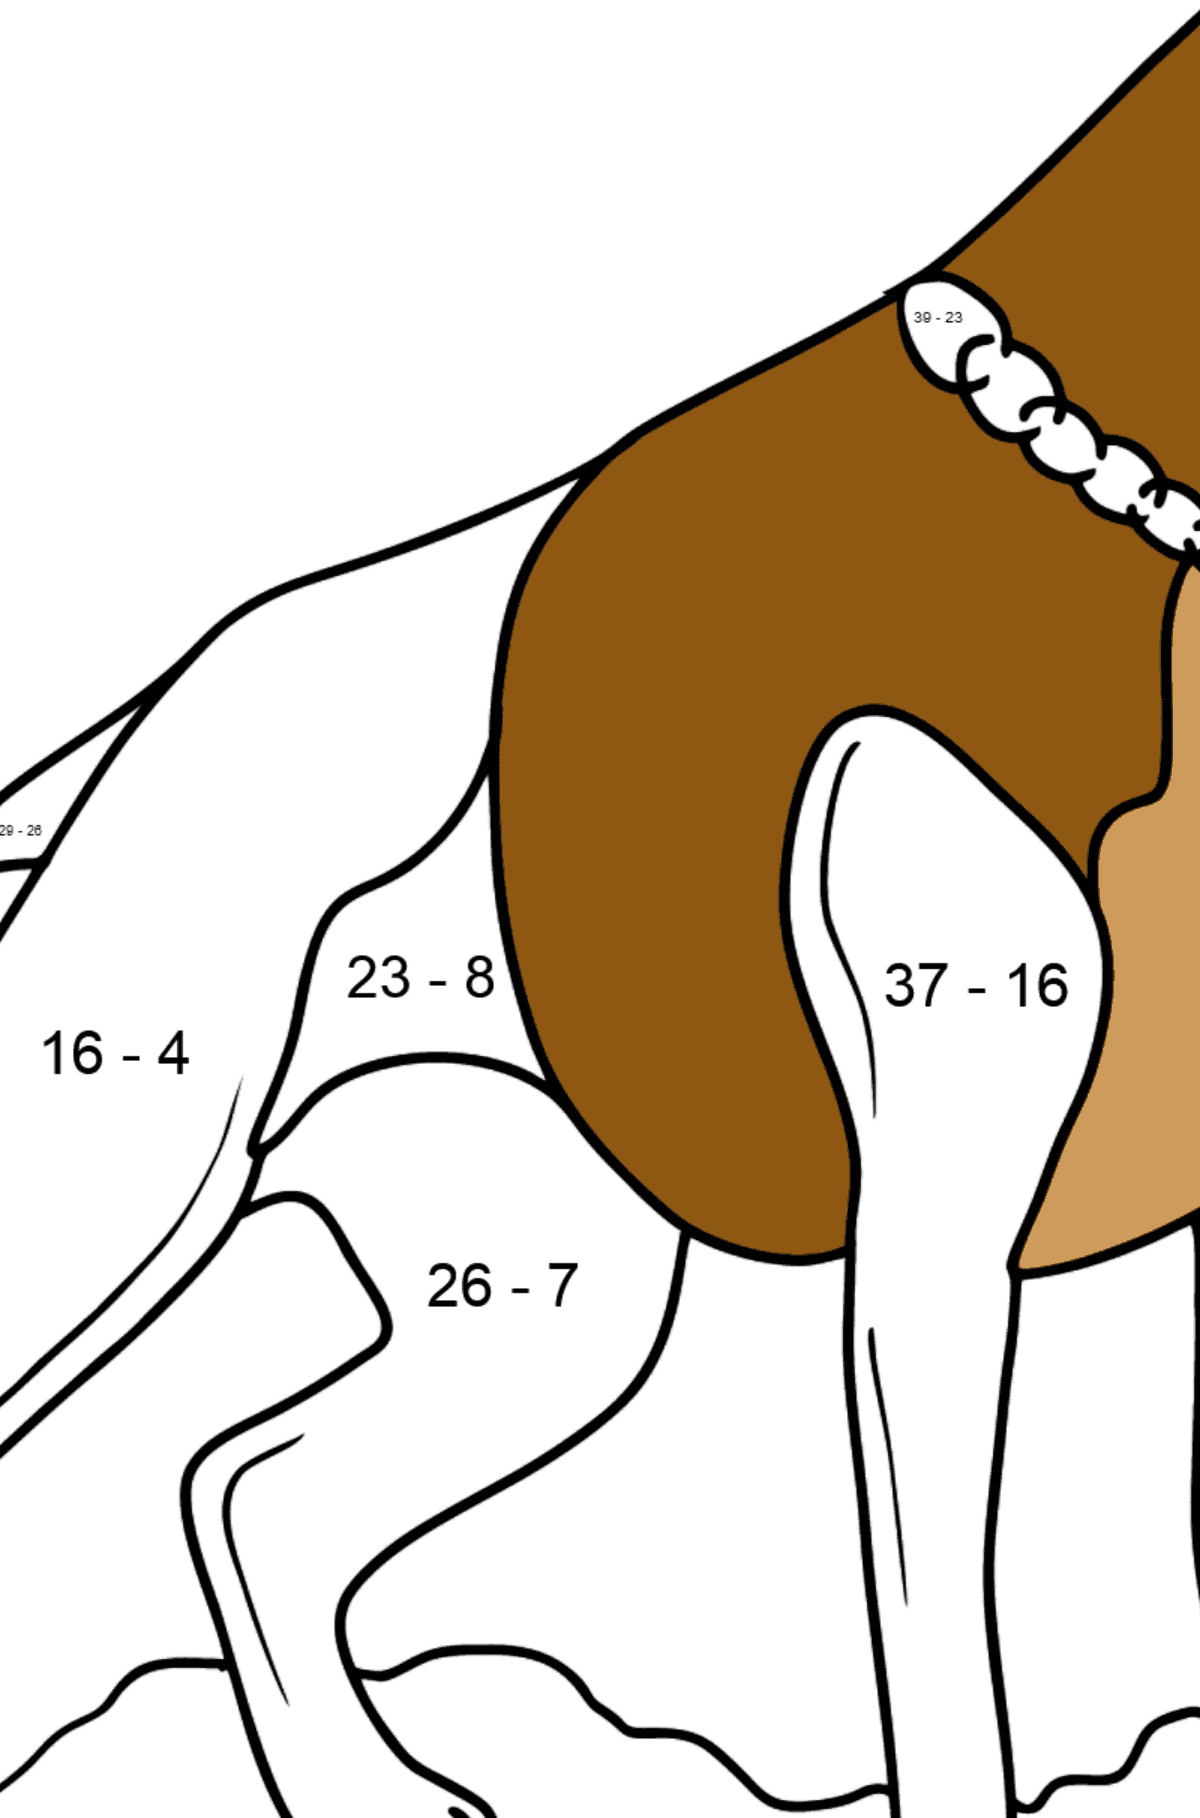 Boxer Dog coloring page - Math Coloring - Subtraction for Kids